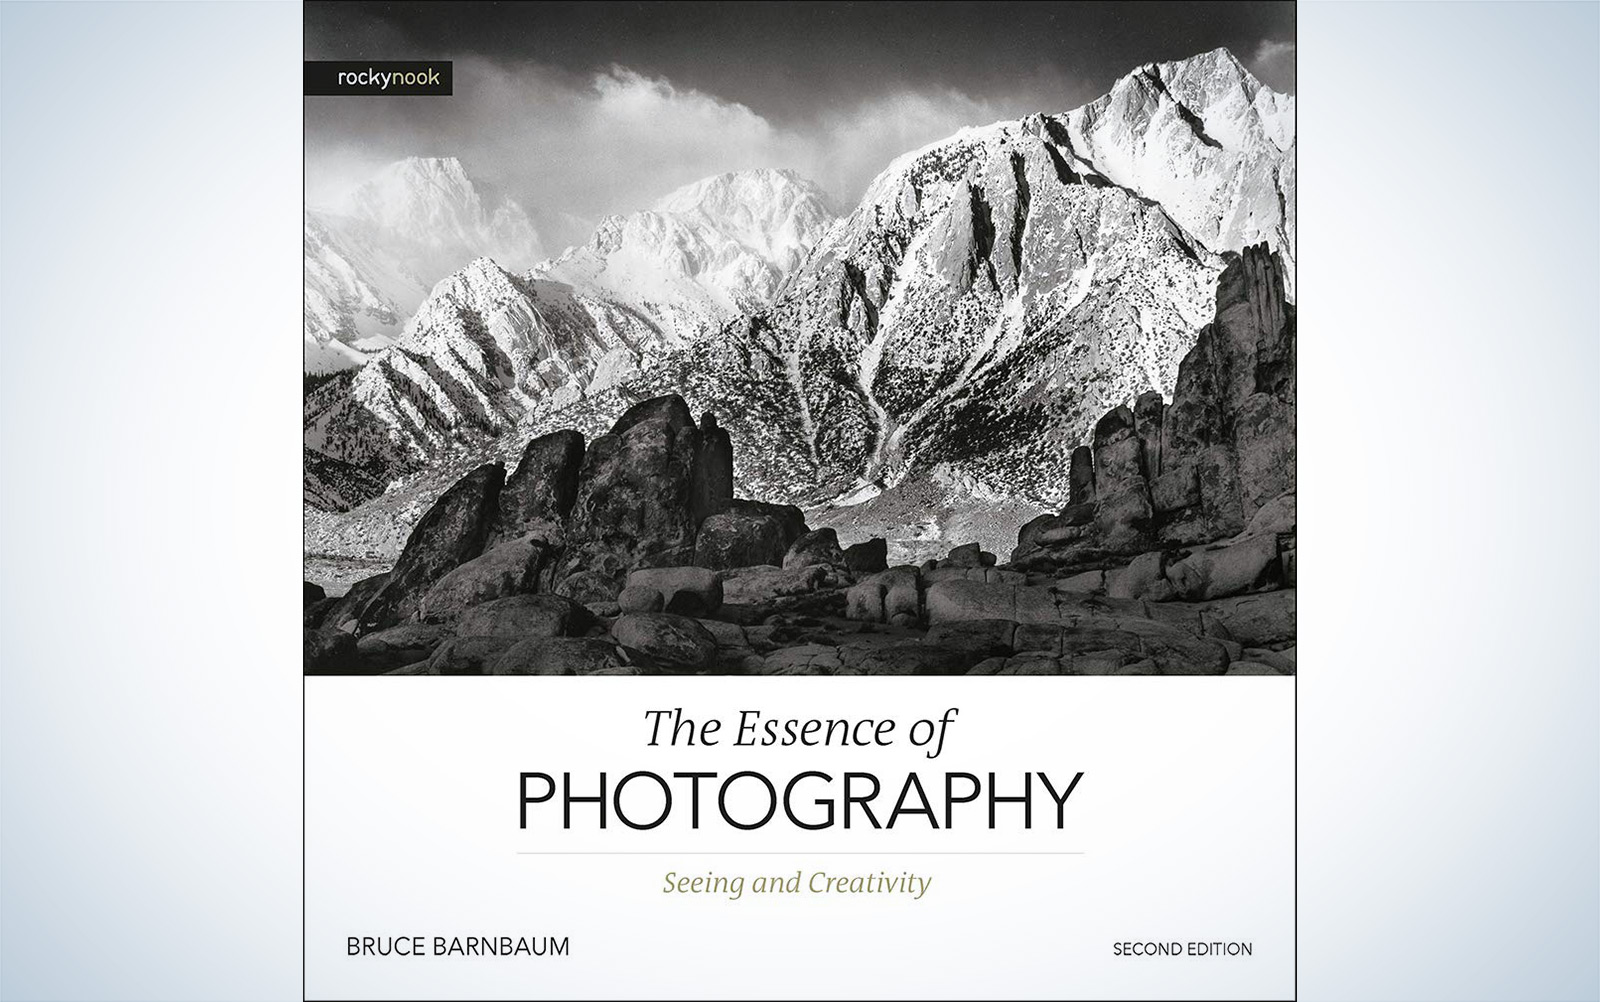 10 Best Photography Books for Beginners